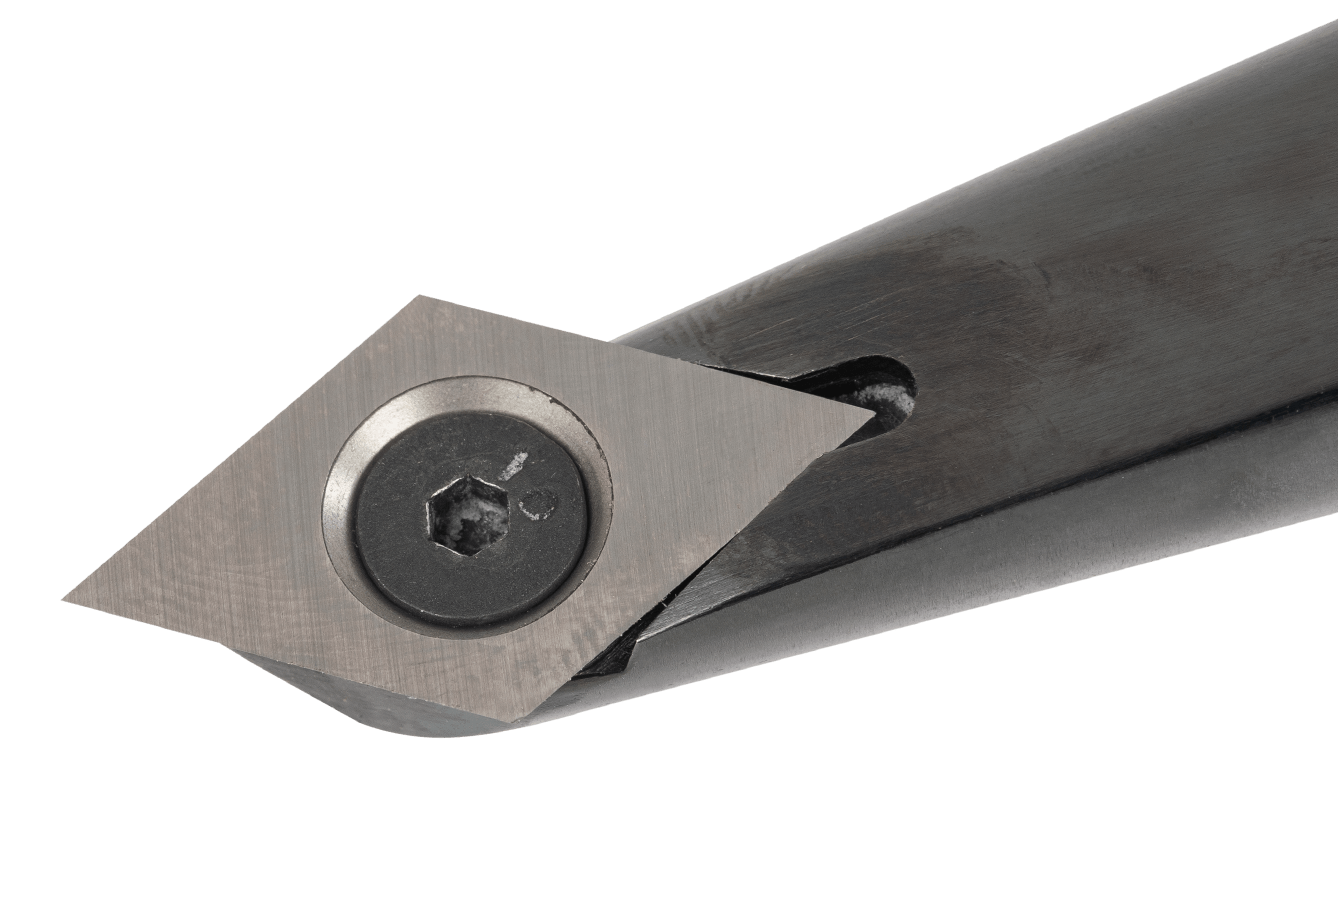 Hot Details about   DSPIAE MT-CB Stepless Ajustment Circular Cutter Tungsten Steel Blades 